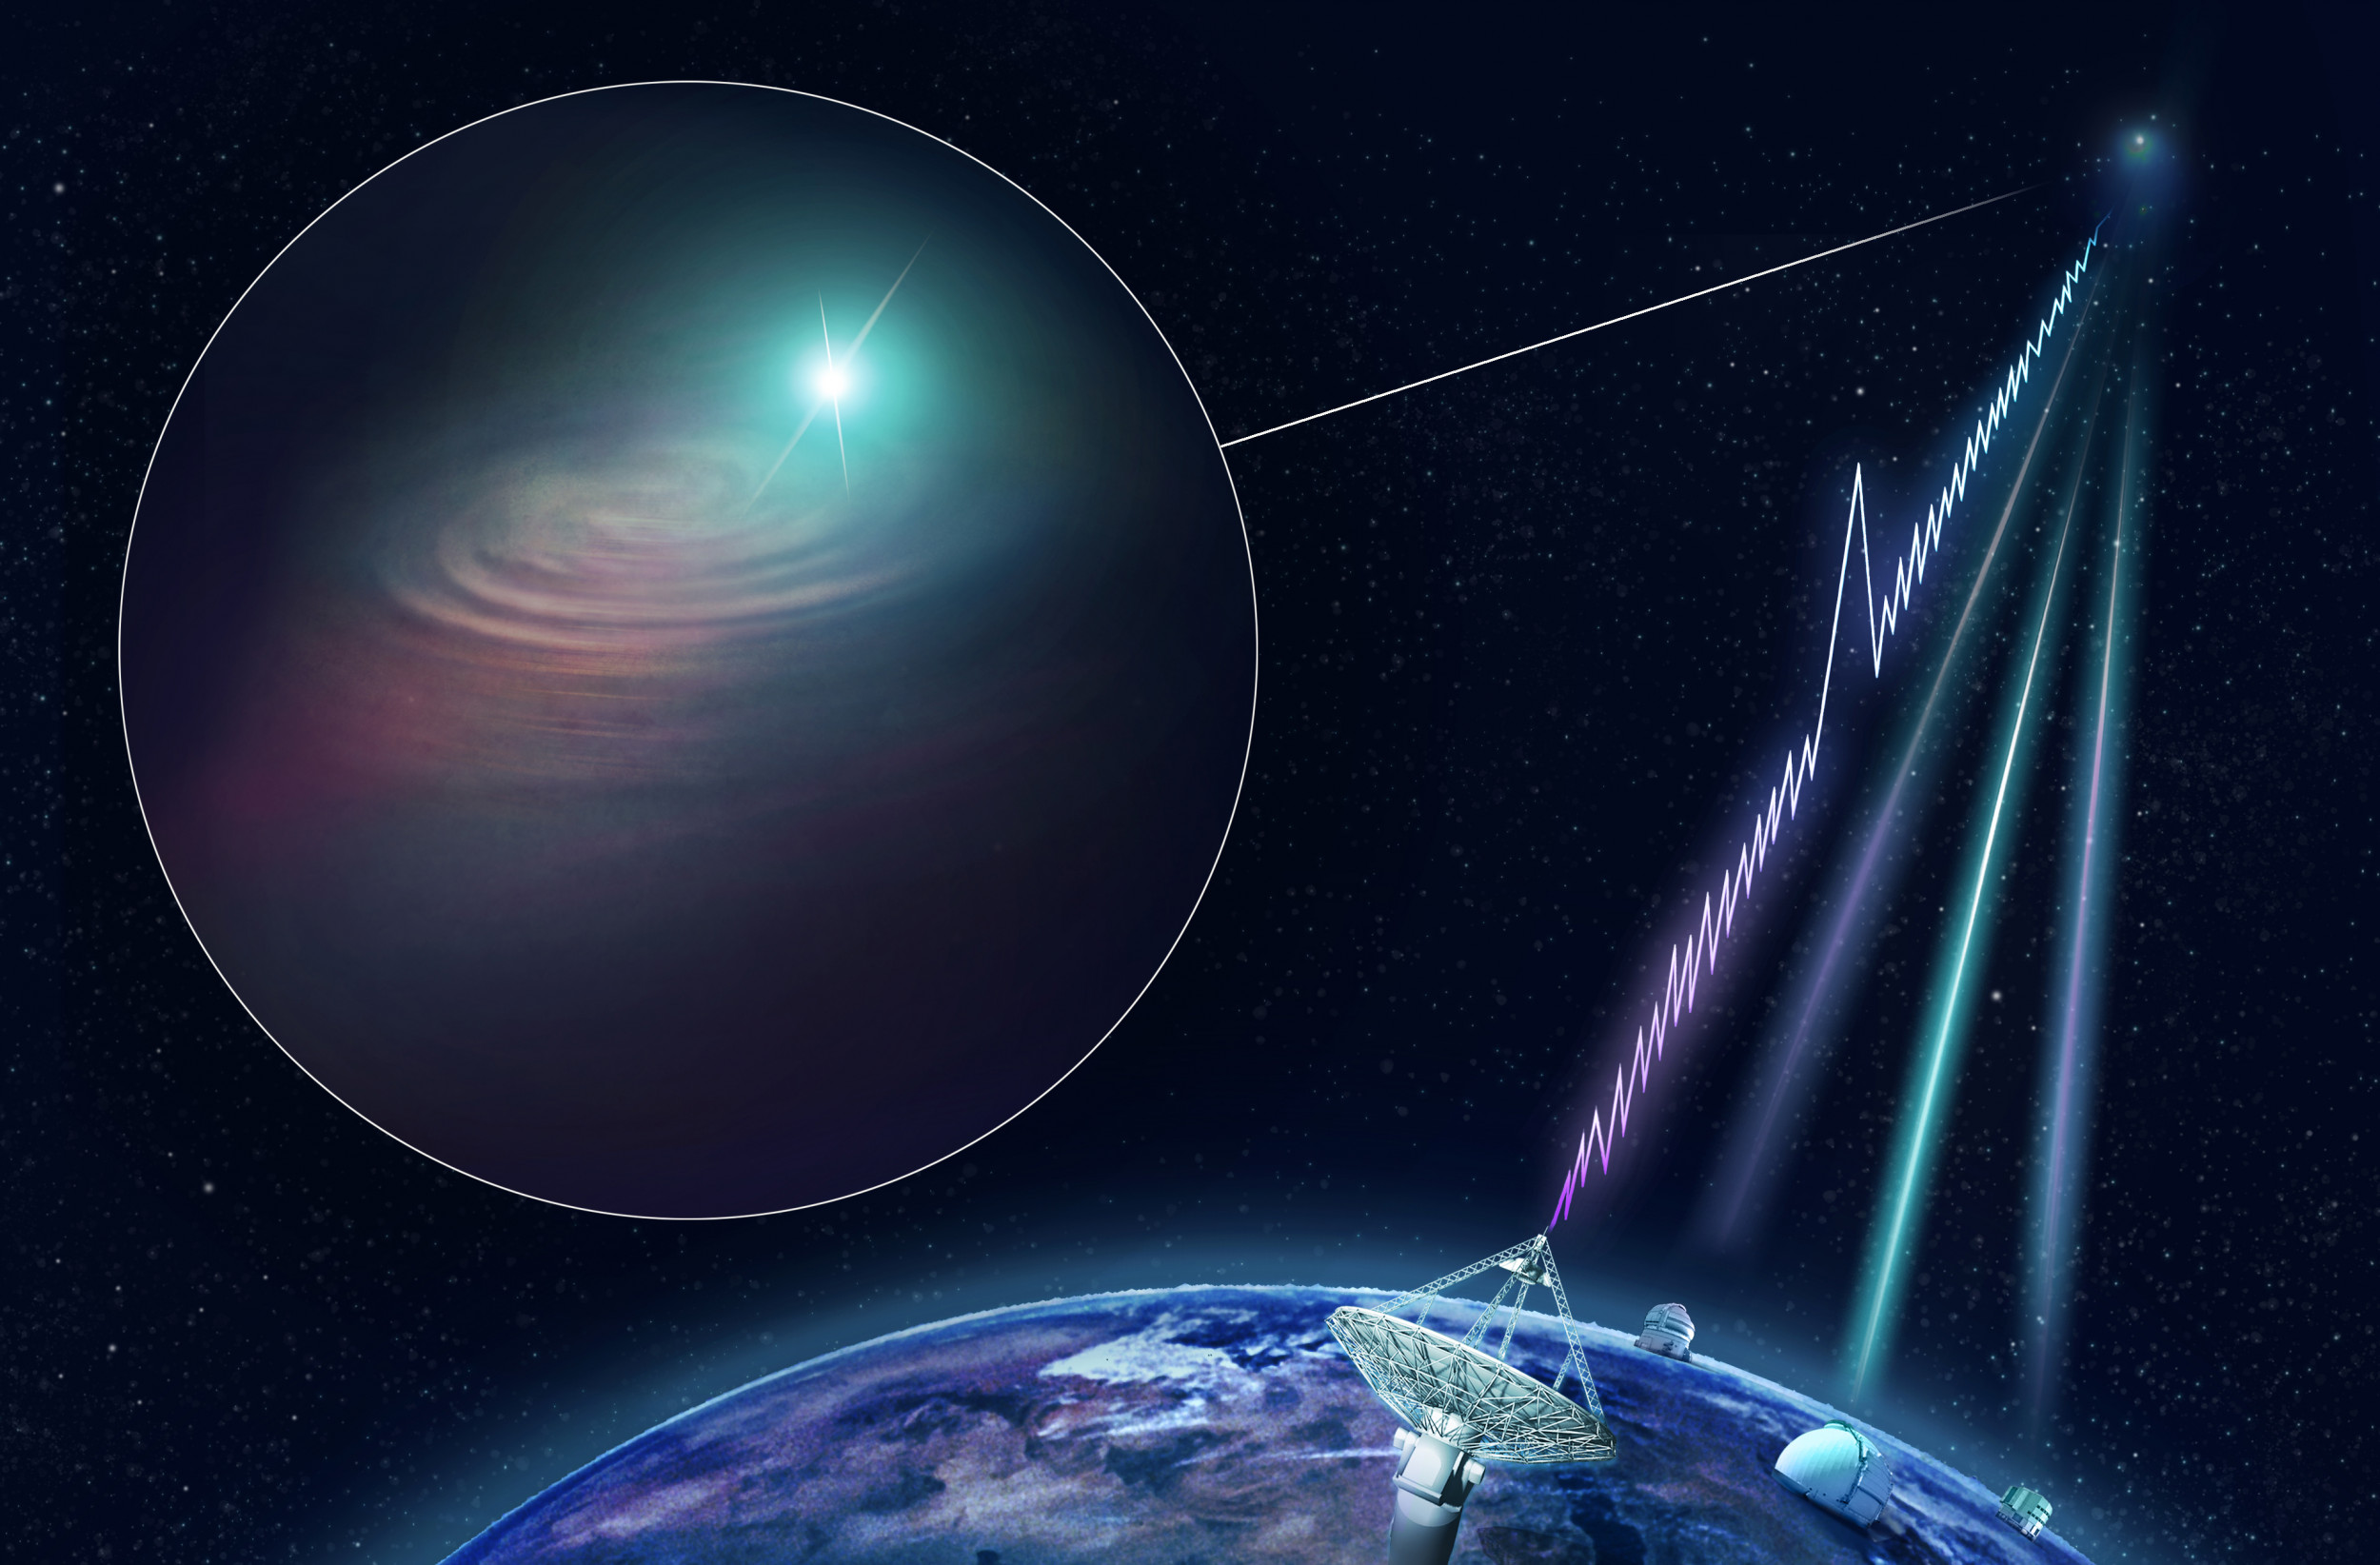 FRBs: Mystery radio signal from galaxy four billion light-years away discovered by scientists